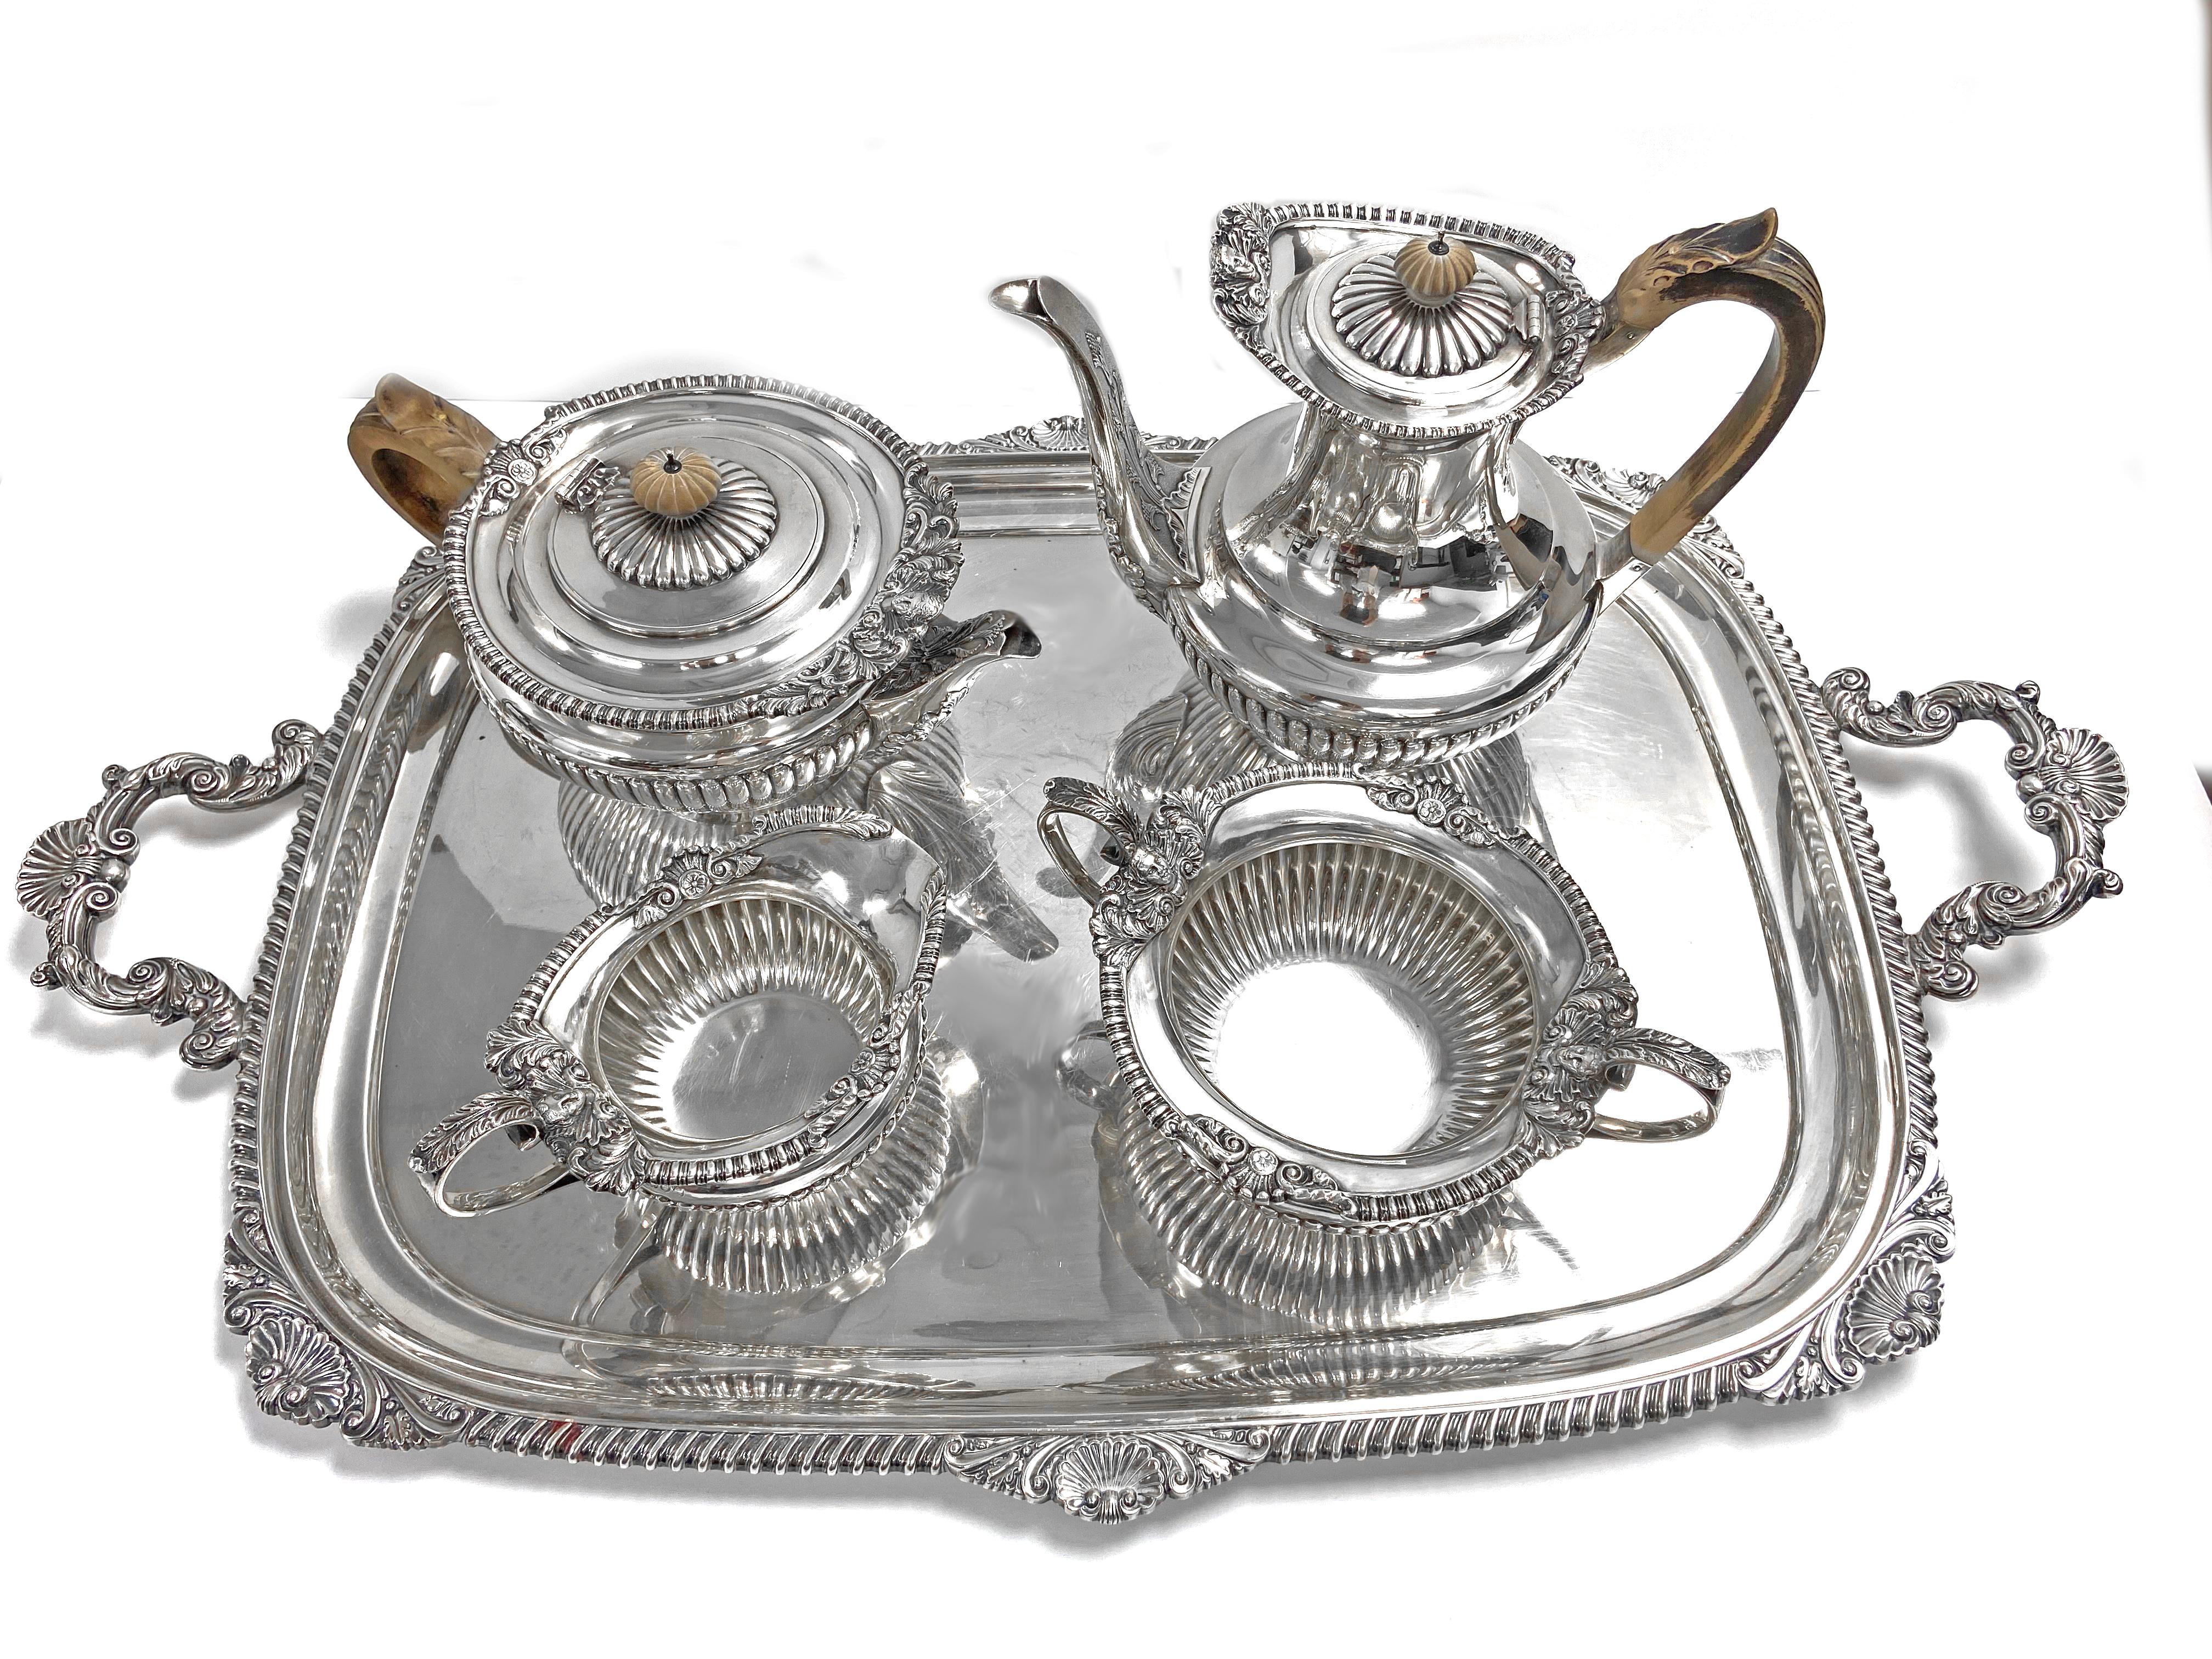 From William & John Barnard & Sons with Robert Dubock a tea service with tray. The tea service is designed in the late Regency style with half reeded baluster form with gadrooned.  The tray features a shell and gadrooned boarder and handle.  Note